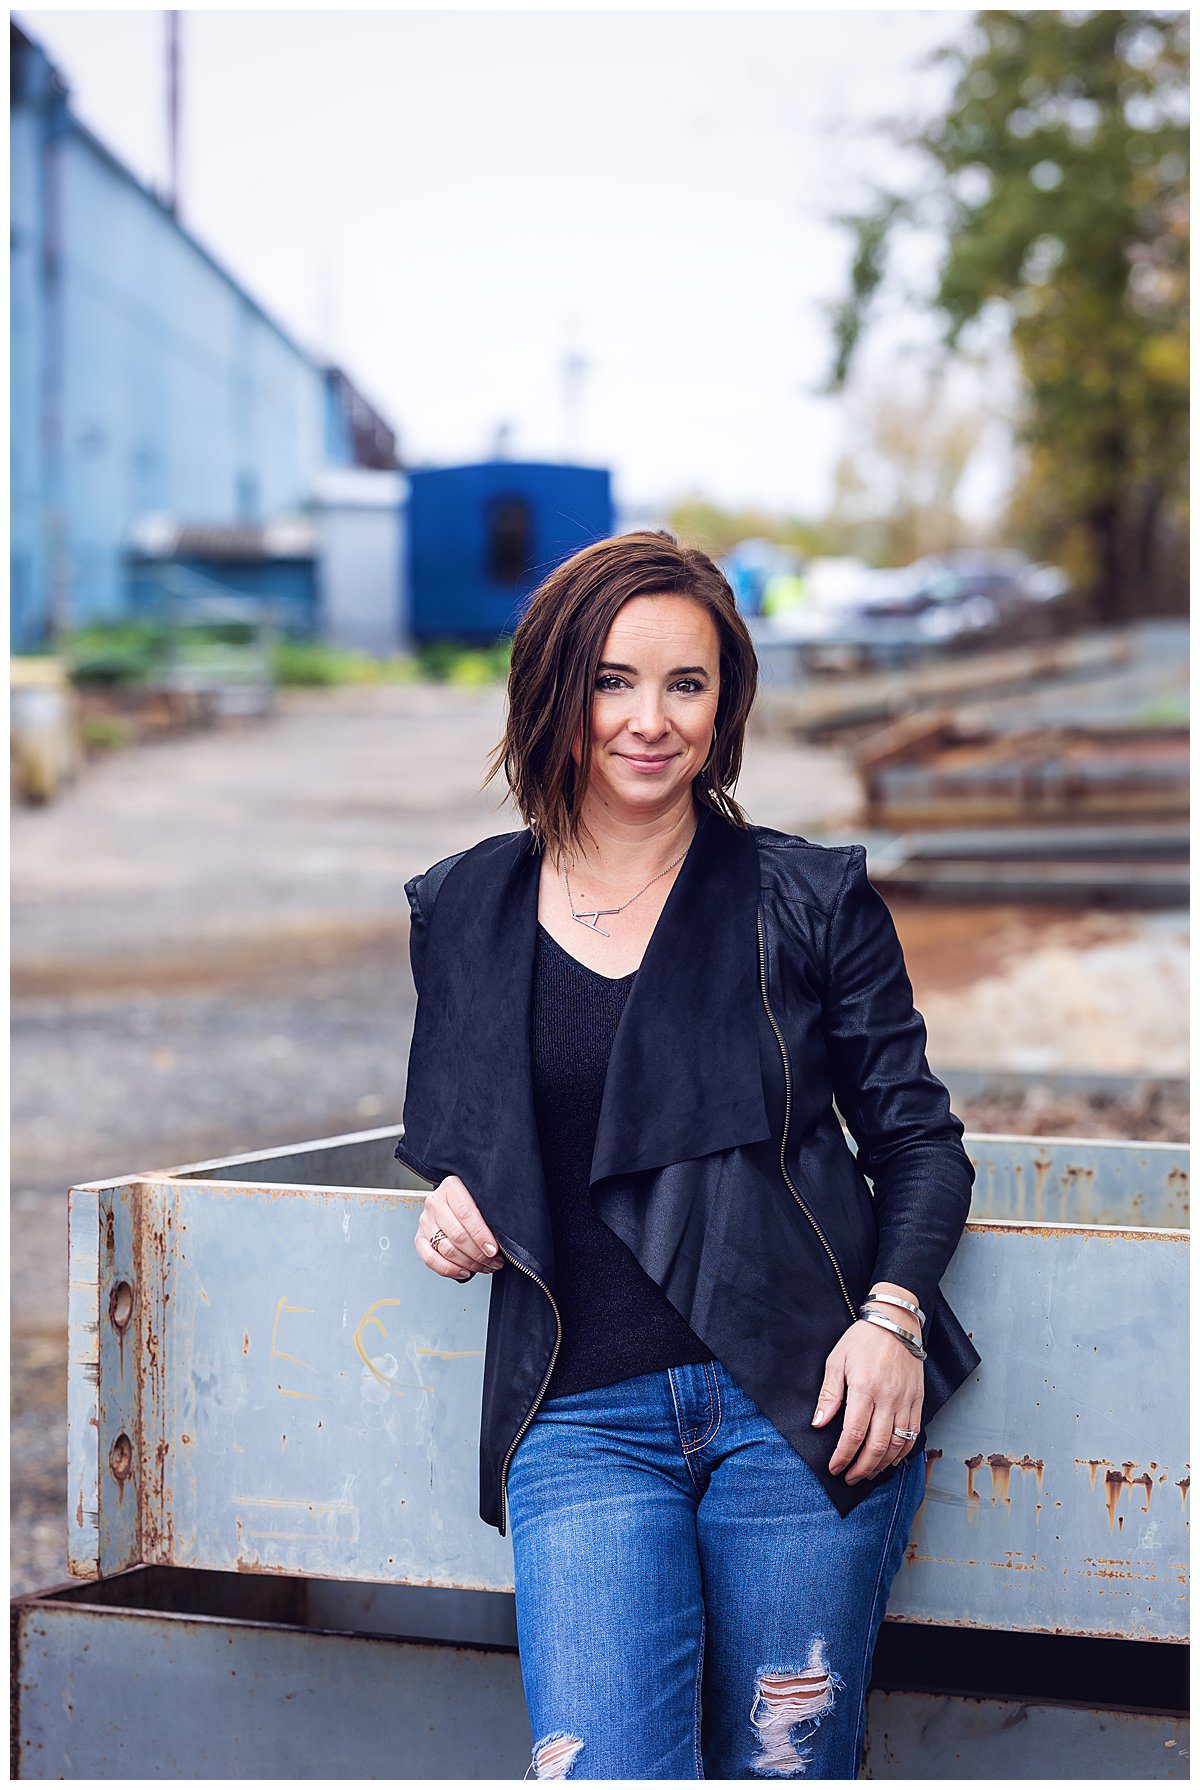 image of Amanda Brisco, photographer. She has short dark hair and is wearing a black jacket with jeans and standing in an industrial alley in Ambridge.